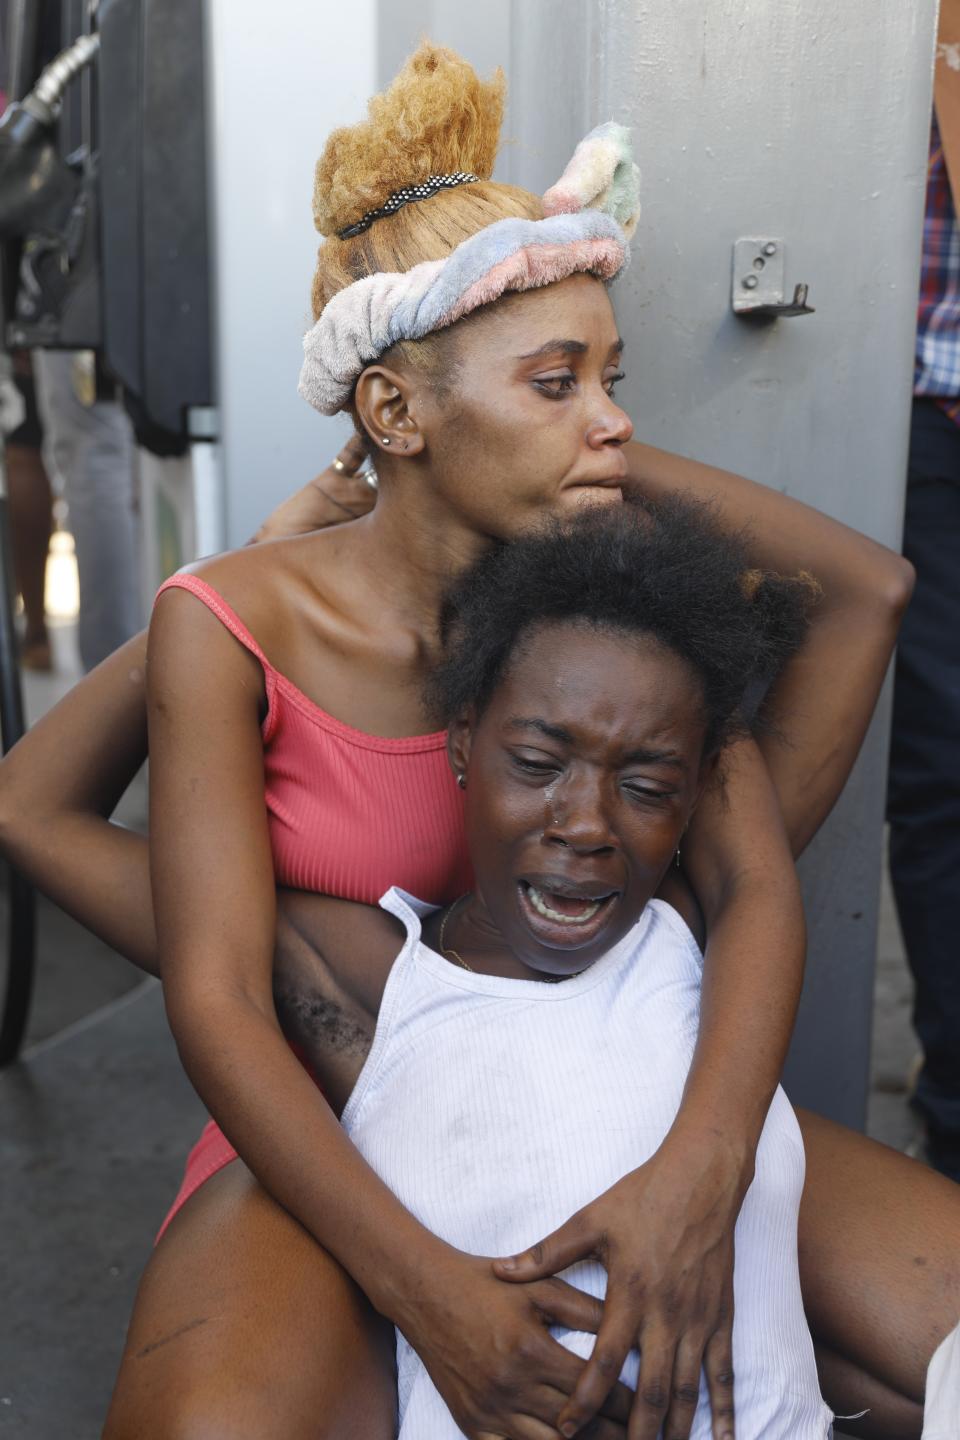 The relative, below, of a person found dead in the street reacts after an overnight shooting in the Petion Ville neighborhood of Port-au-Prince, Haiti, Monday, March 18, 2024. (AP Photo/Odelyn Joseph)